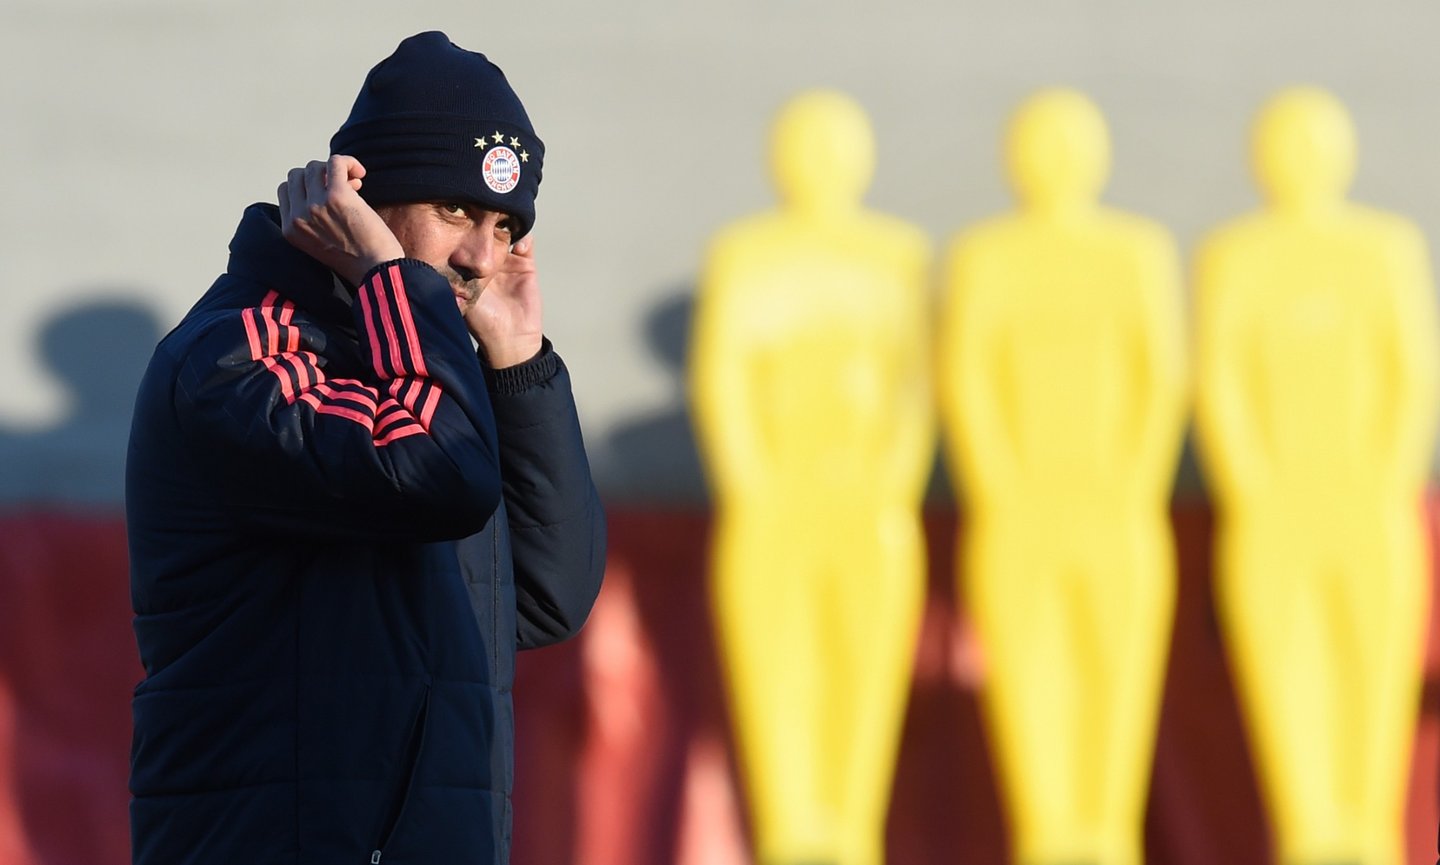 Bayern Munich's Spanish headcoach Pep Guardiola arrives for the training session on the eve of the UEFA Champions League Group F football match between Bayern Munich and Olympiakos Piraeus in Munich, southern Germany, on November 23, 2015. AFP PHOTO / CHRISTOF STACHE / AFP / CHRISTOF STACHE (Photo credit should read CHRISTOF STACHE/AFP/Getty Images)